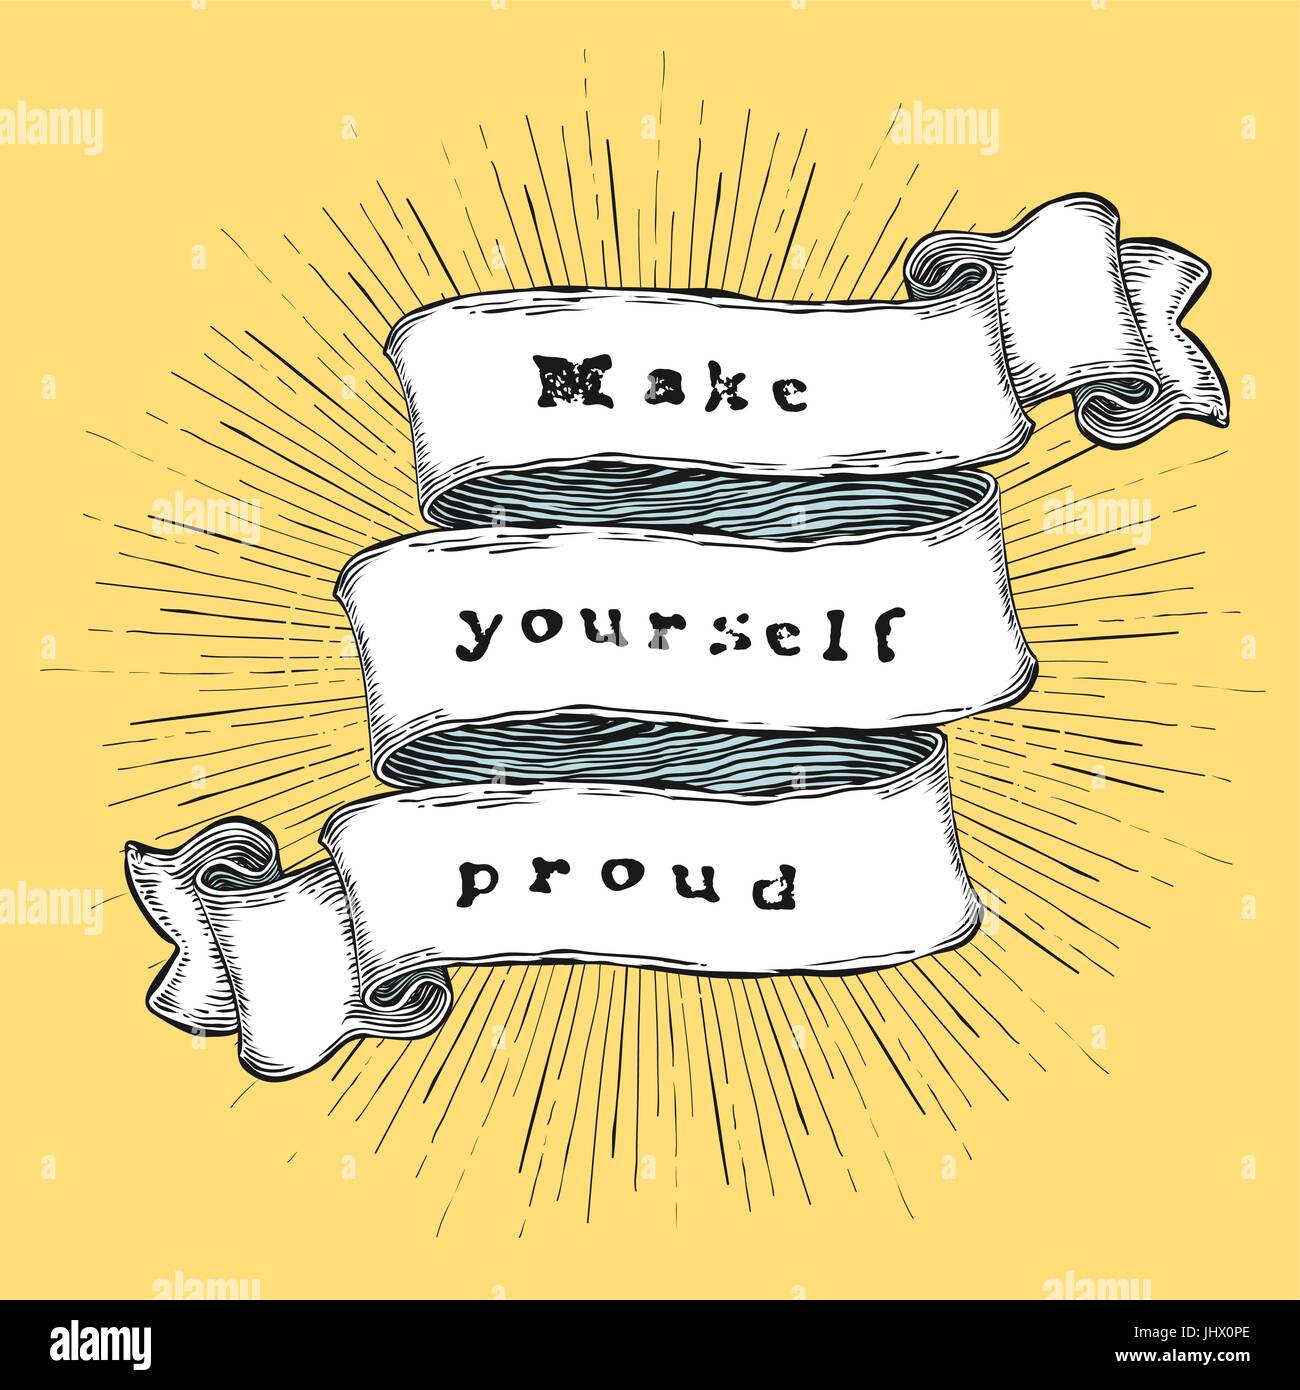 Make yourself proud. Inspiration quote. Vintage hand-drawn quote on ribbon. Stock Vector